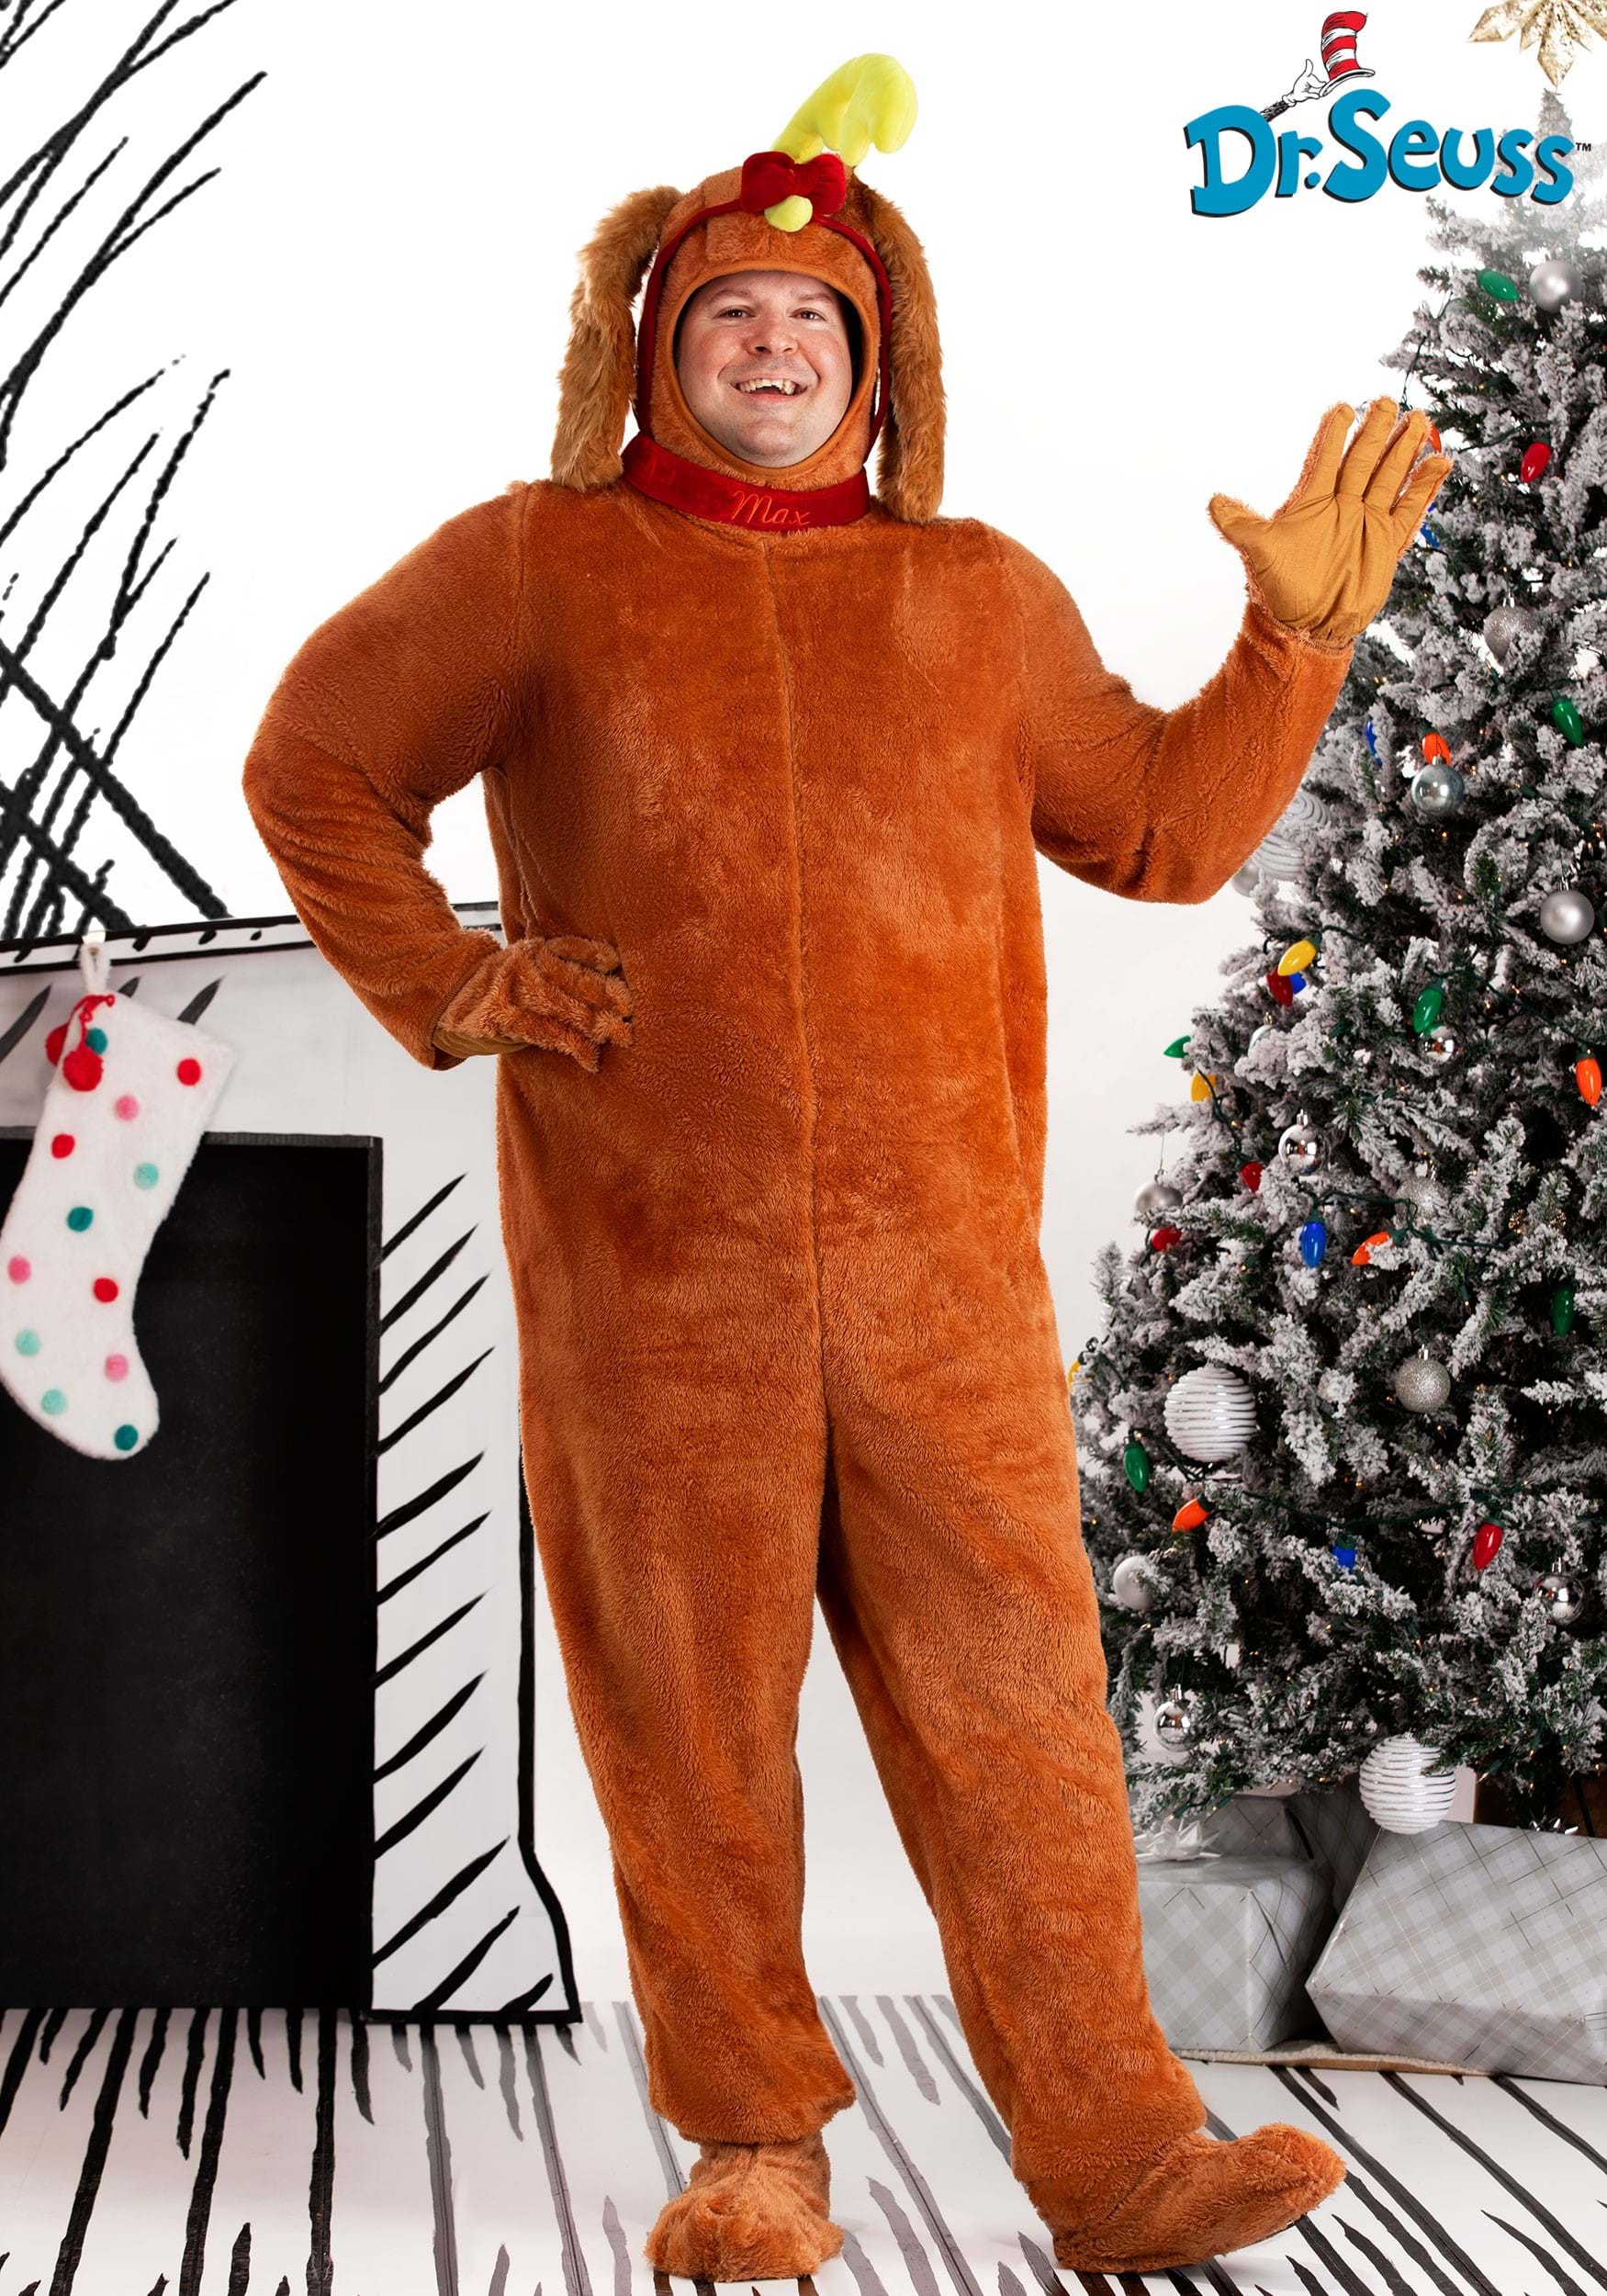 https://images.halloween.com/products/86499/1-1/dr-seuss-the-grinch-plus-size-max-costume.jpg